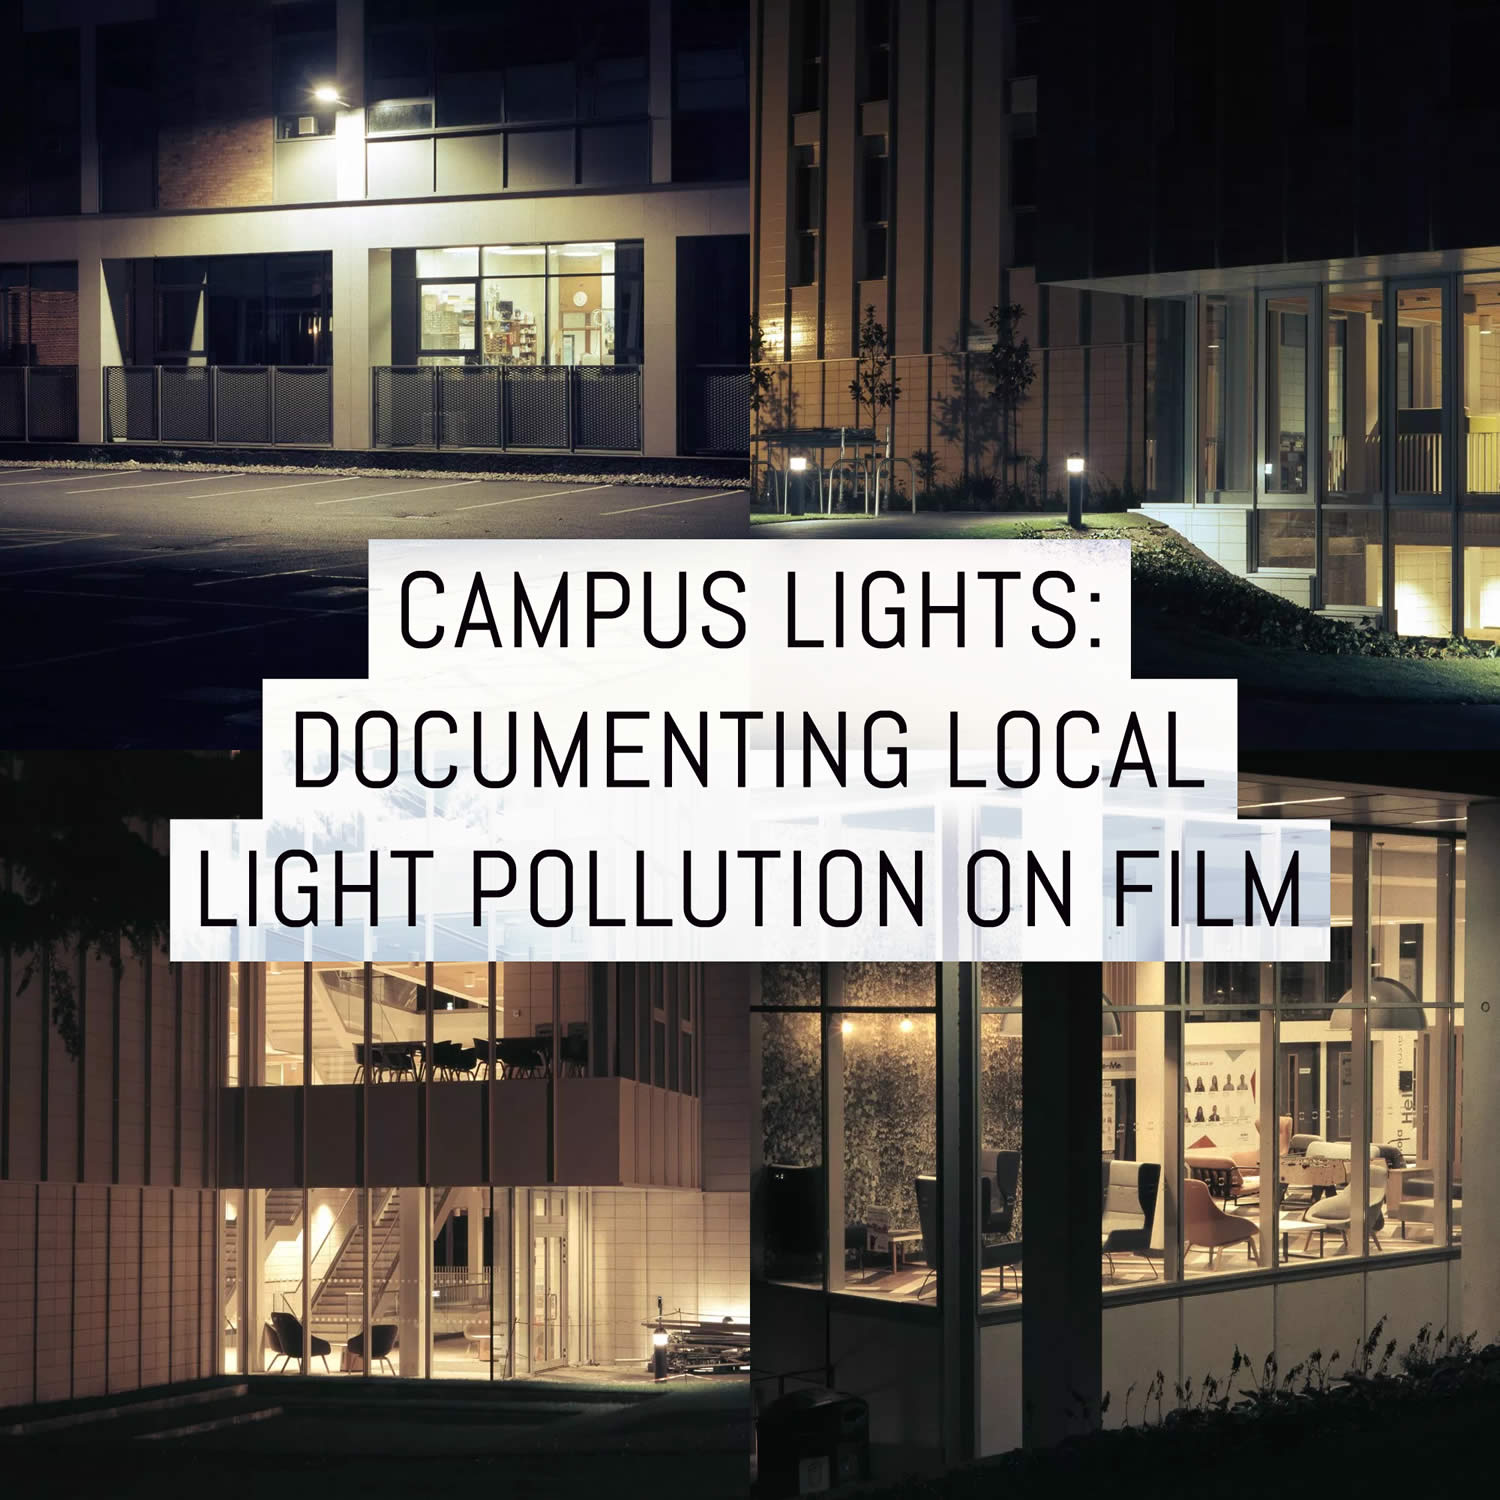 Campus lights: documenting local light pollution on film